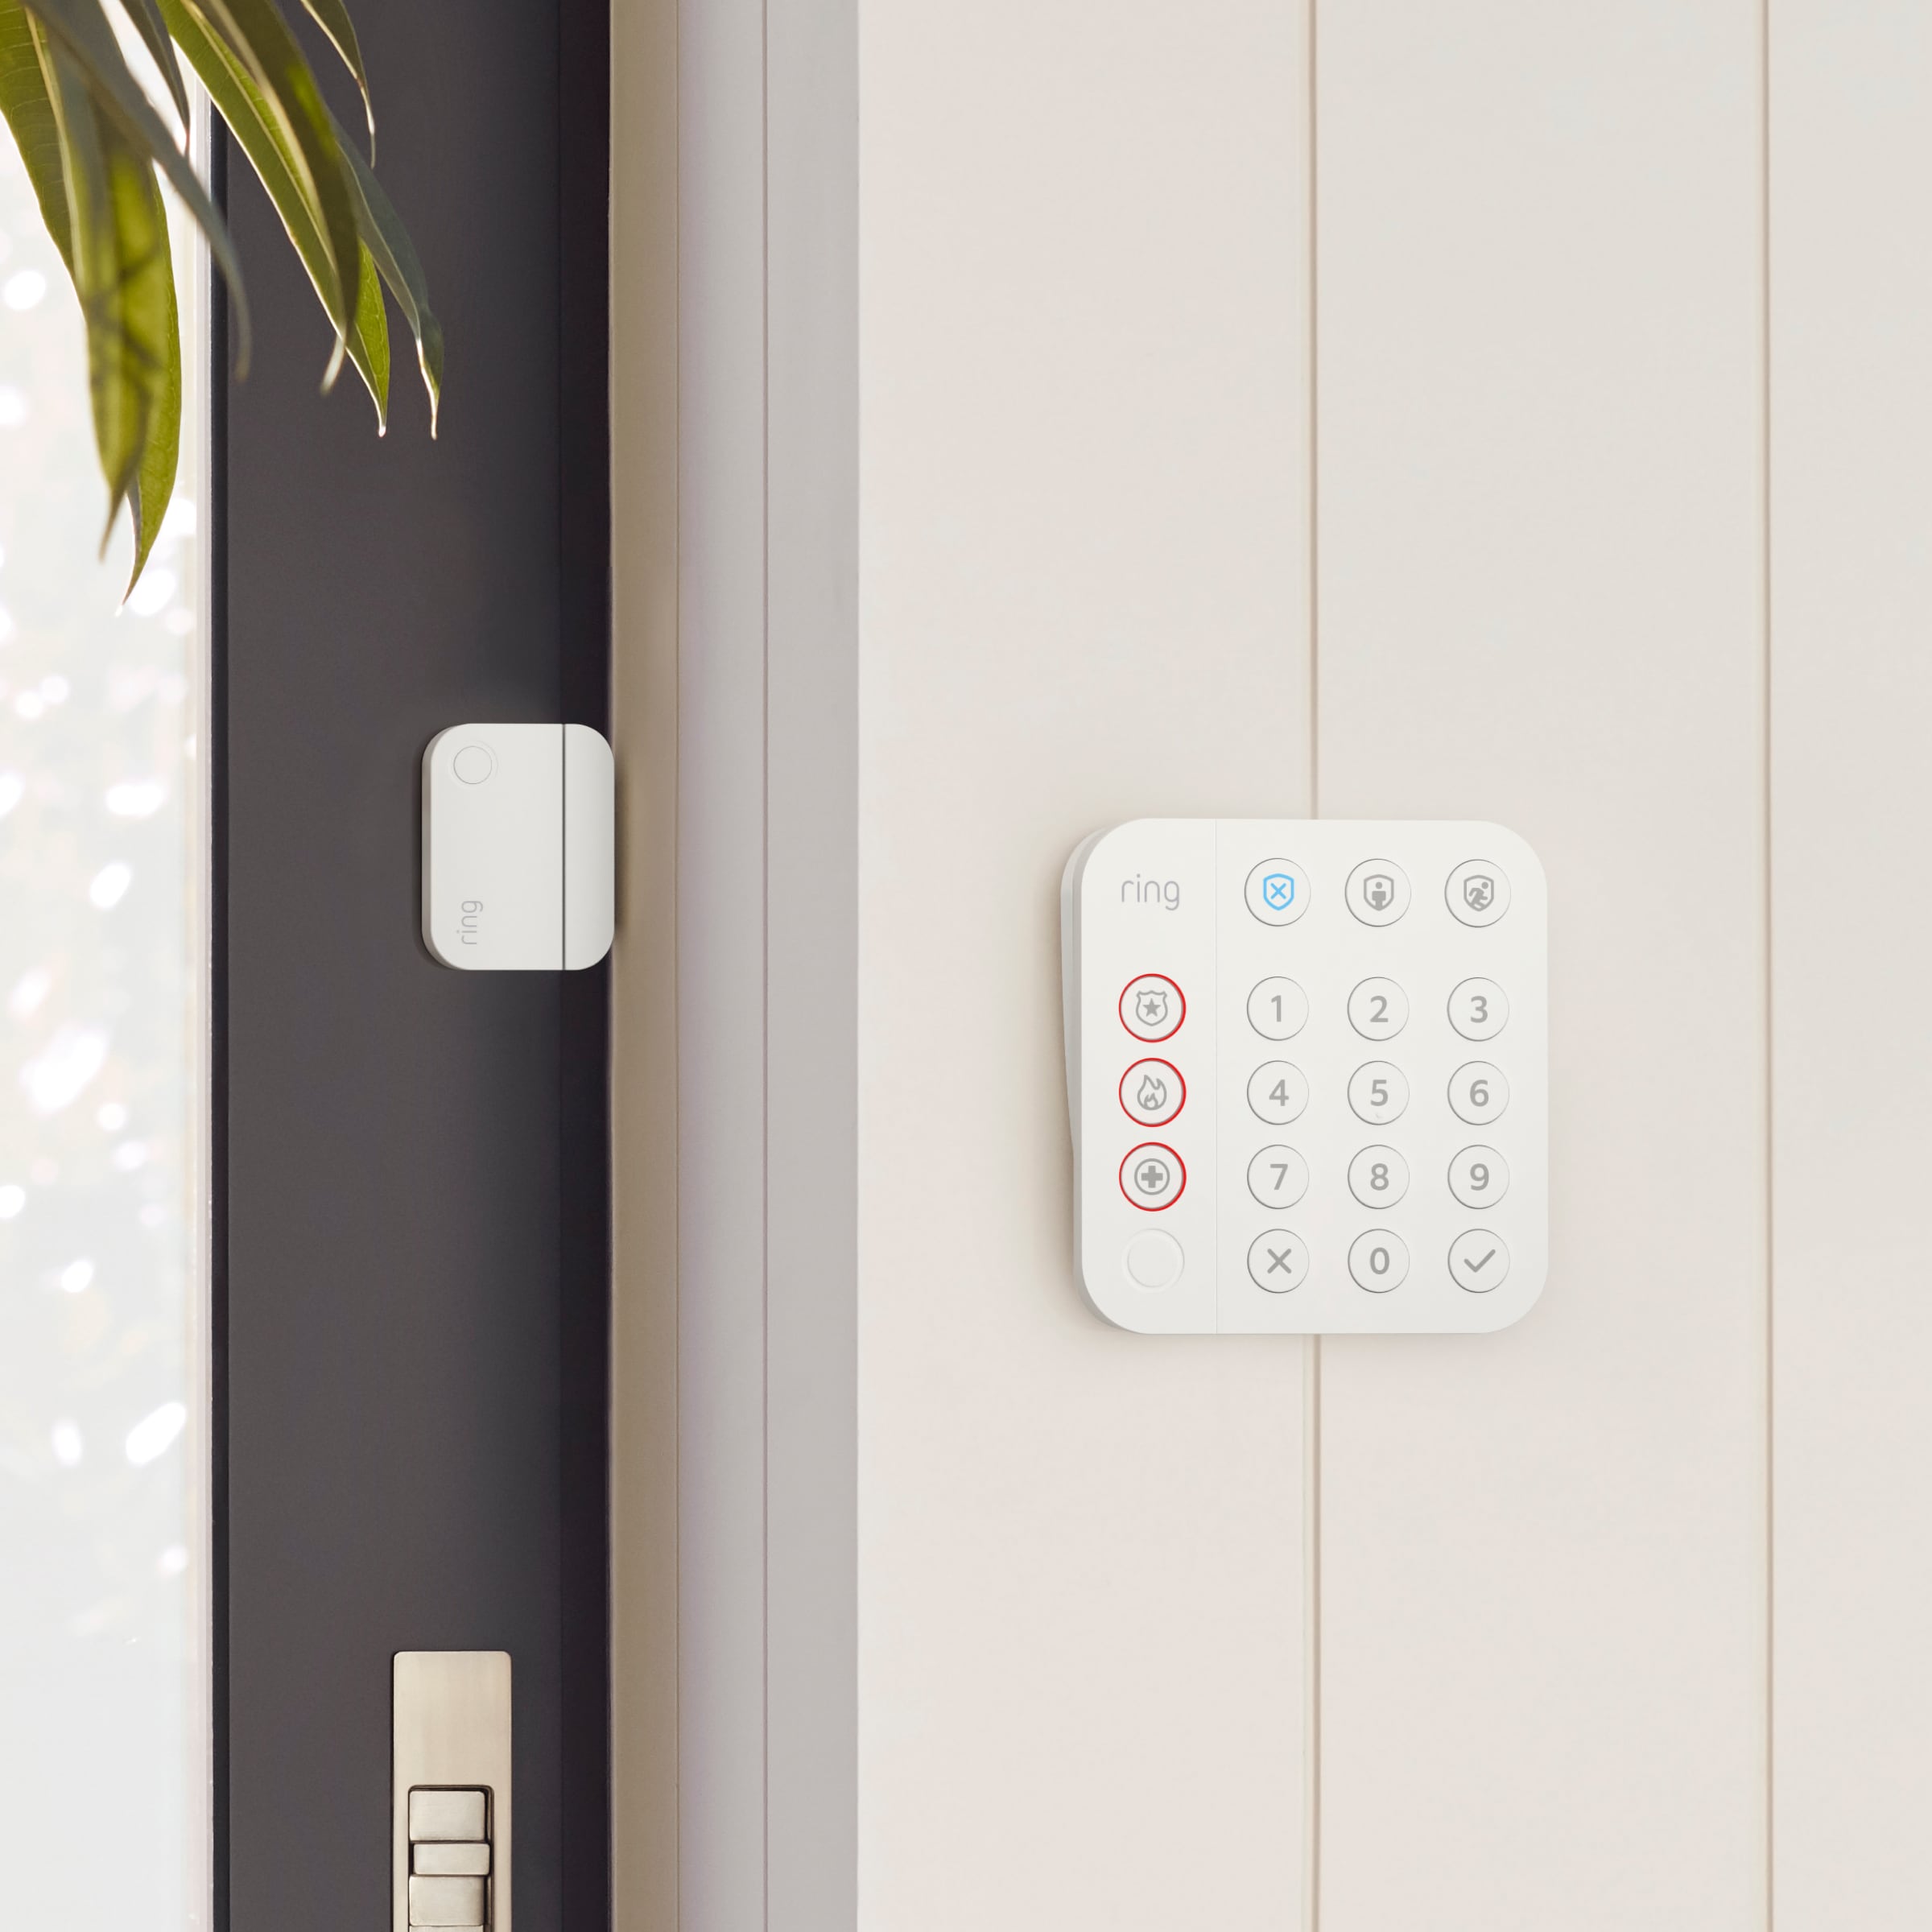 Ring Alarm Security System Cost & Pricing Plans